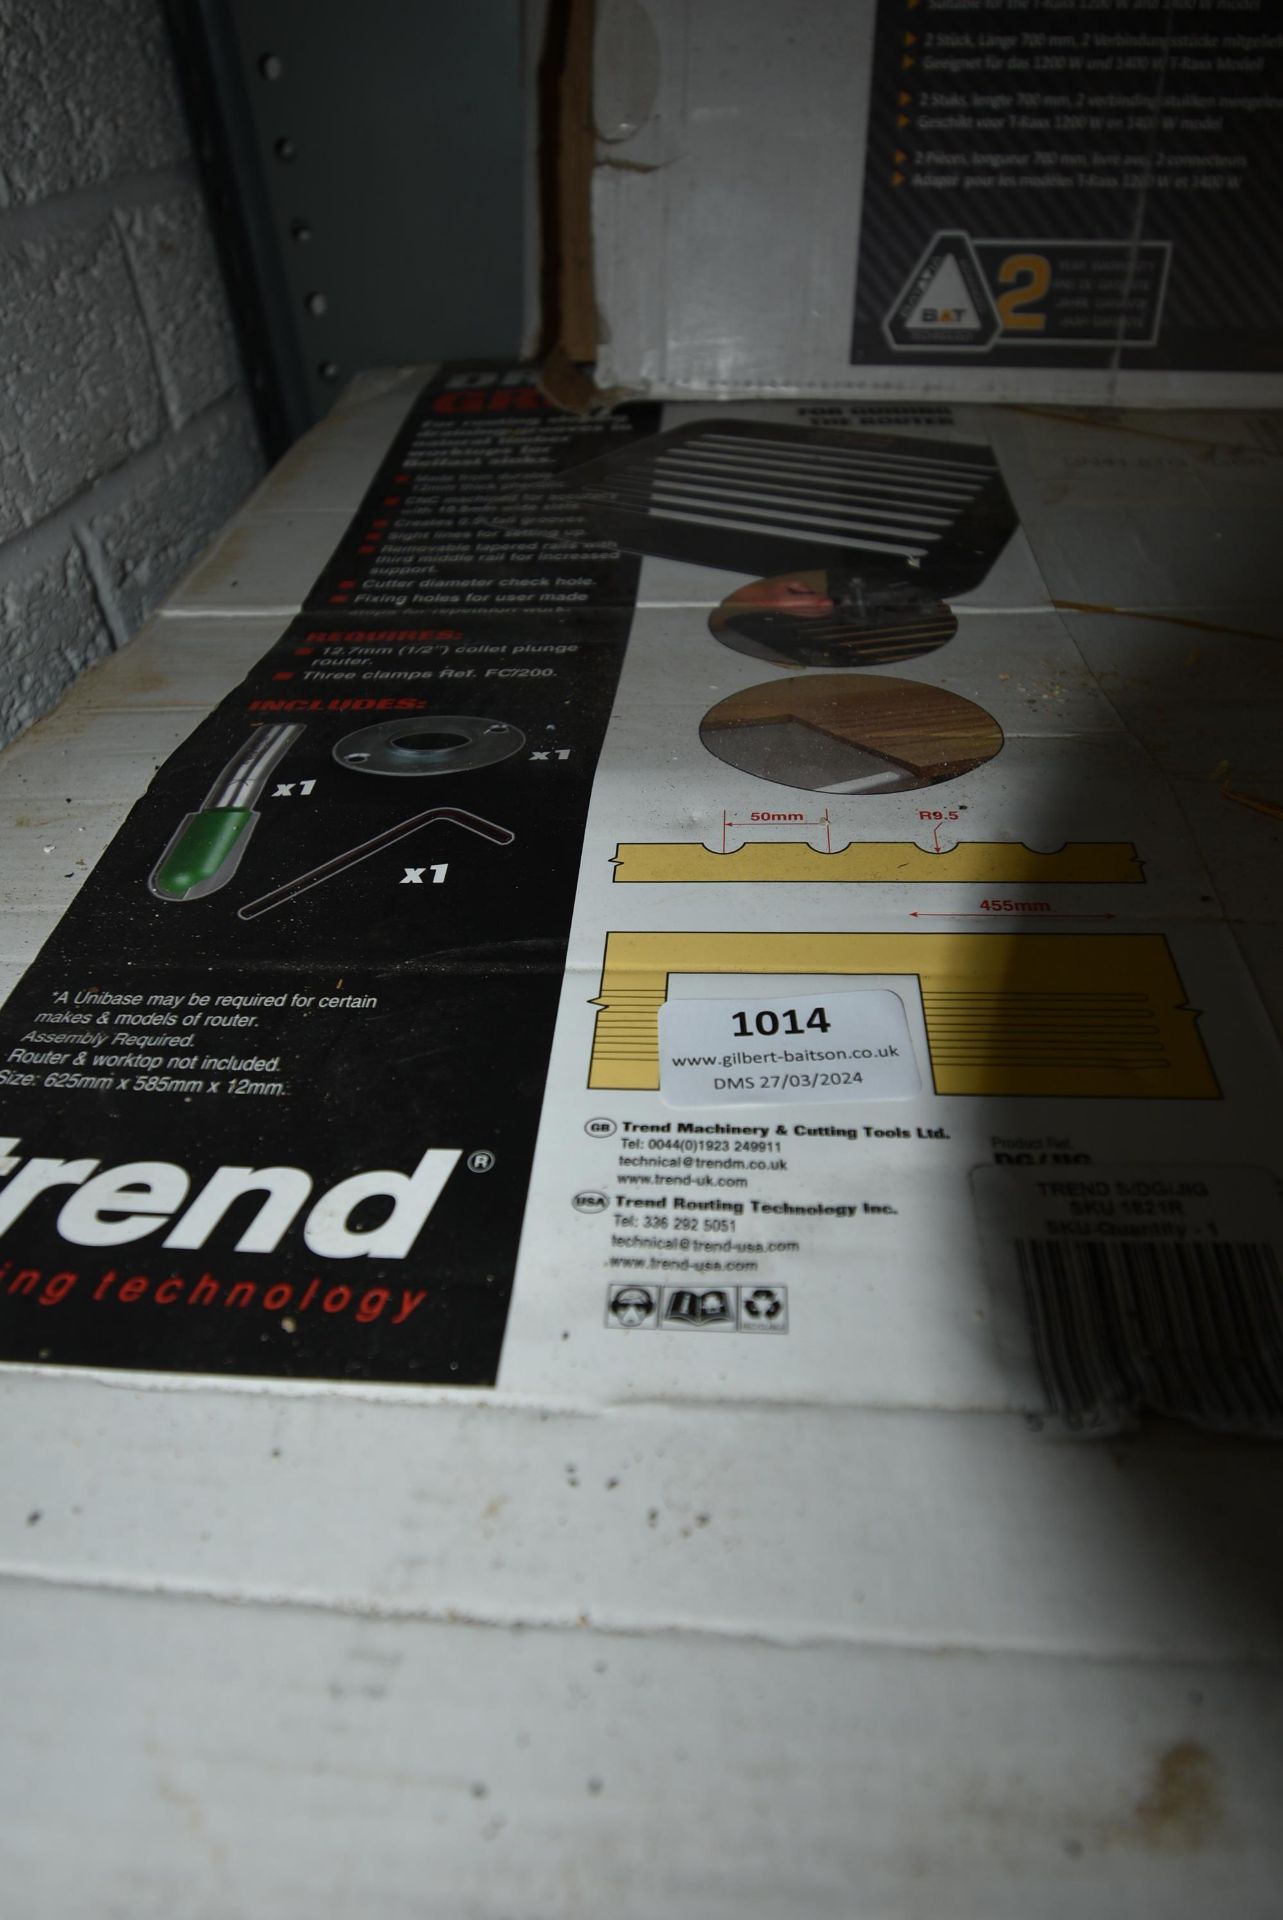 *Trend Draining Grooving Jig for Solid Wood Worksurfaces (Location: 64 King Edward St, Grimsby, DN31